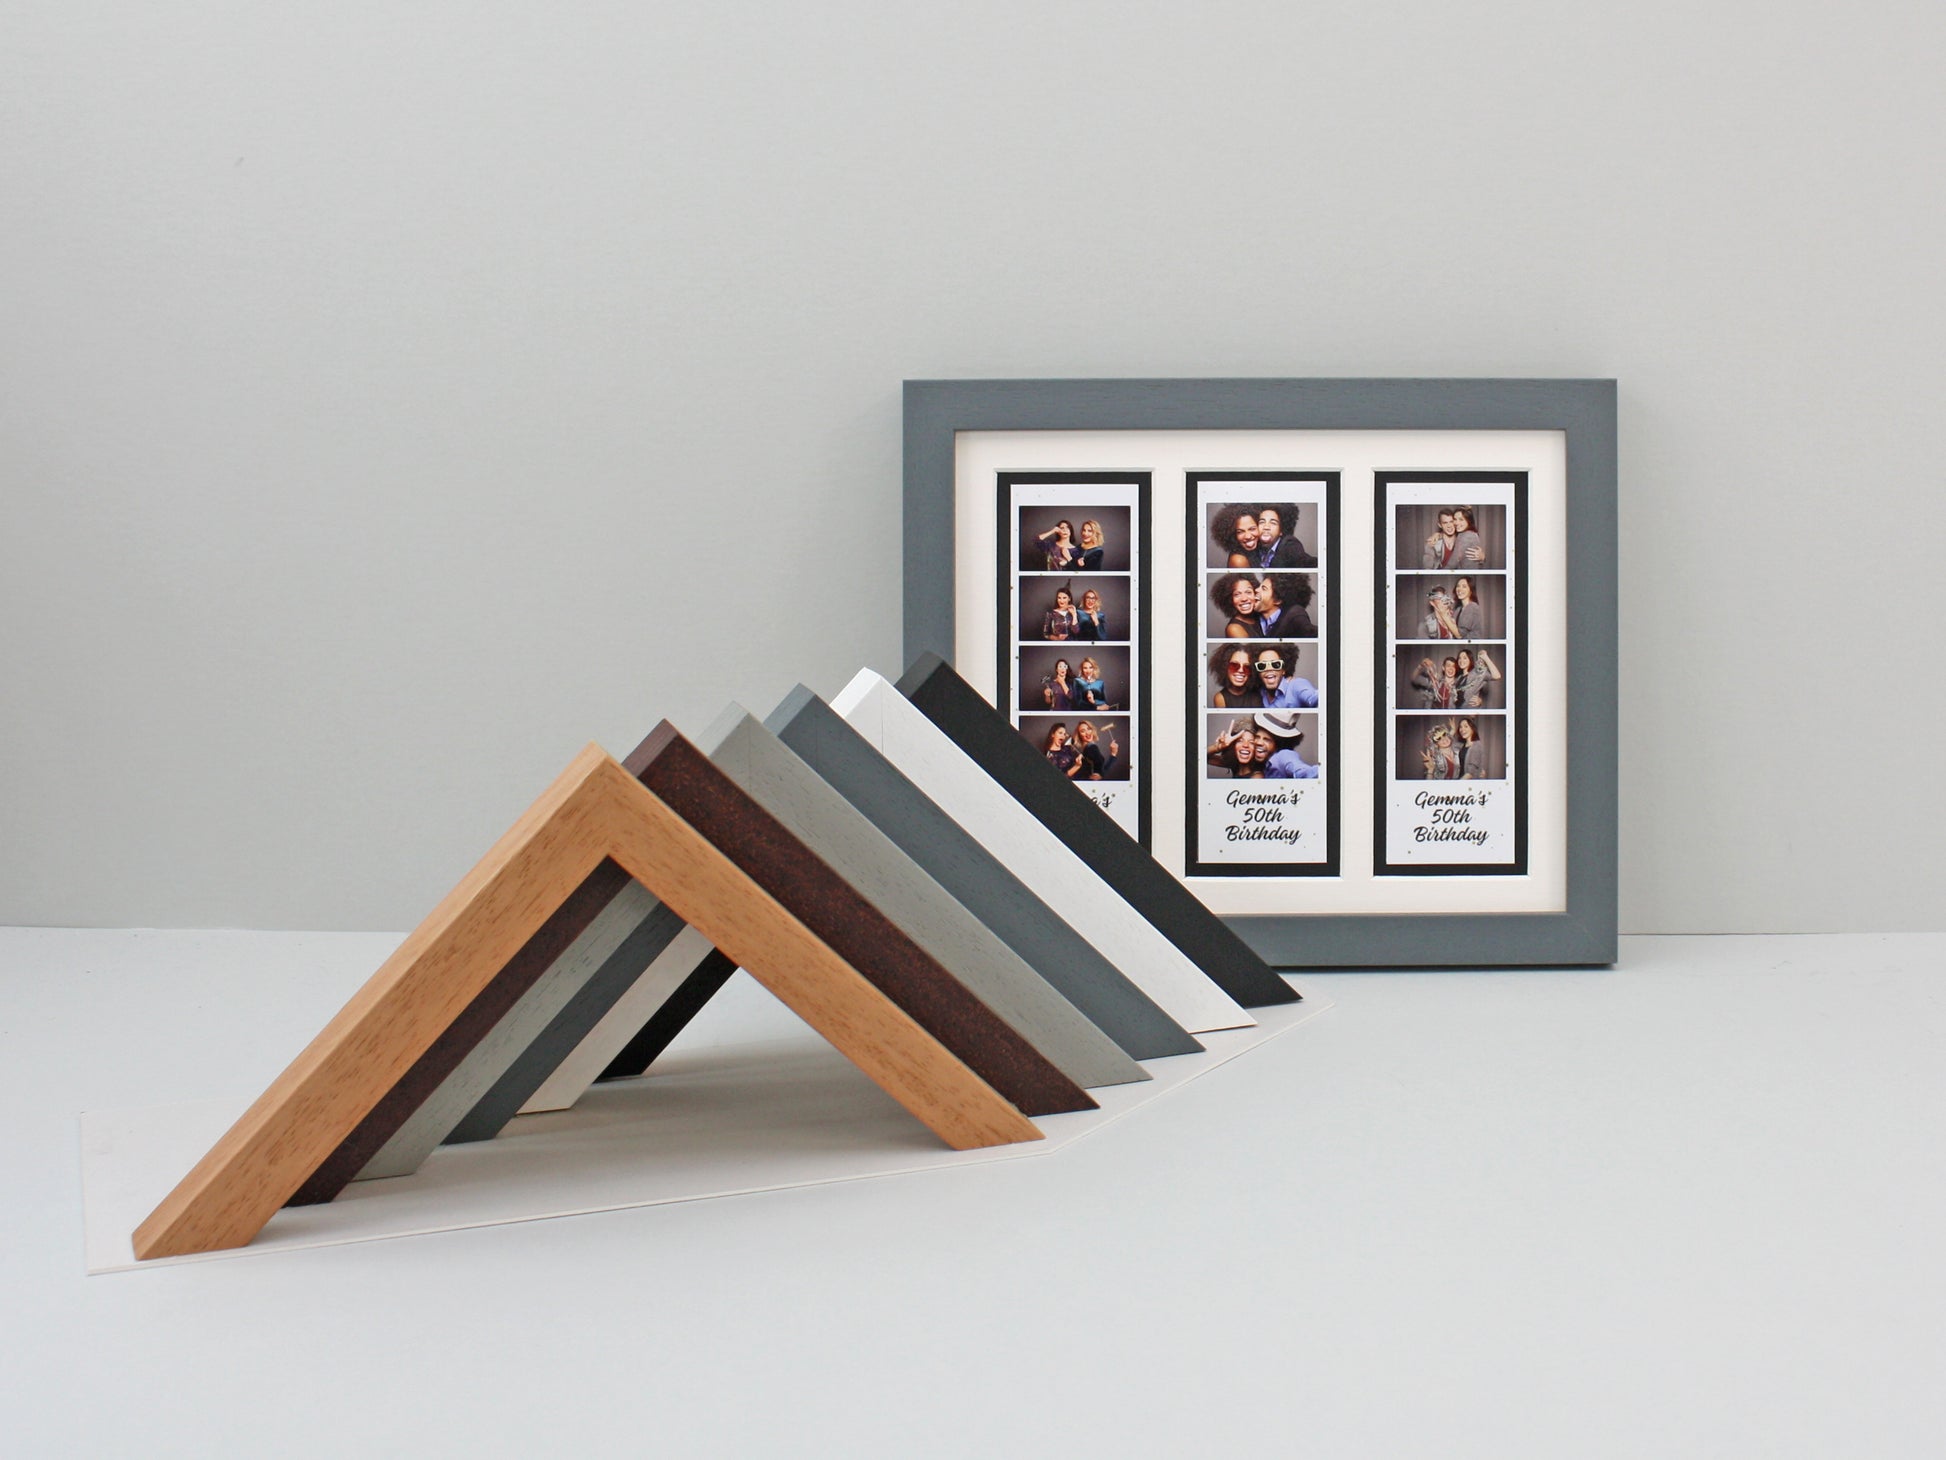 Photo Booth Strip Floating Frame - 3 Photo Booth Strips - Floating Photo Frame showing the entire Photo strip, including border. - PhotoFramesandMore - Wooden Picture Frames